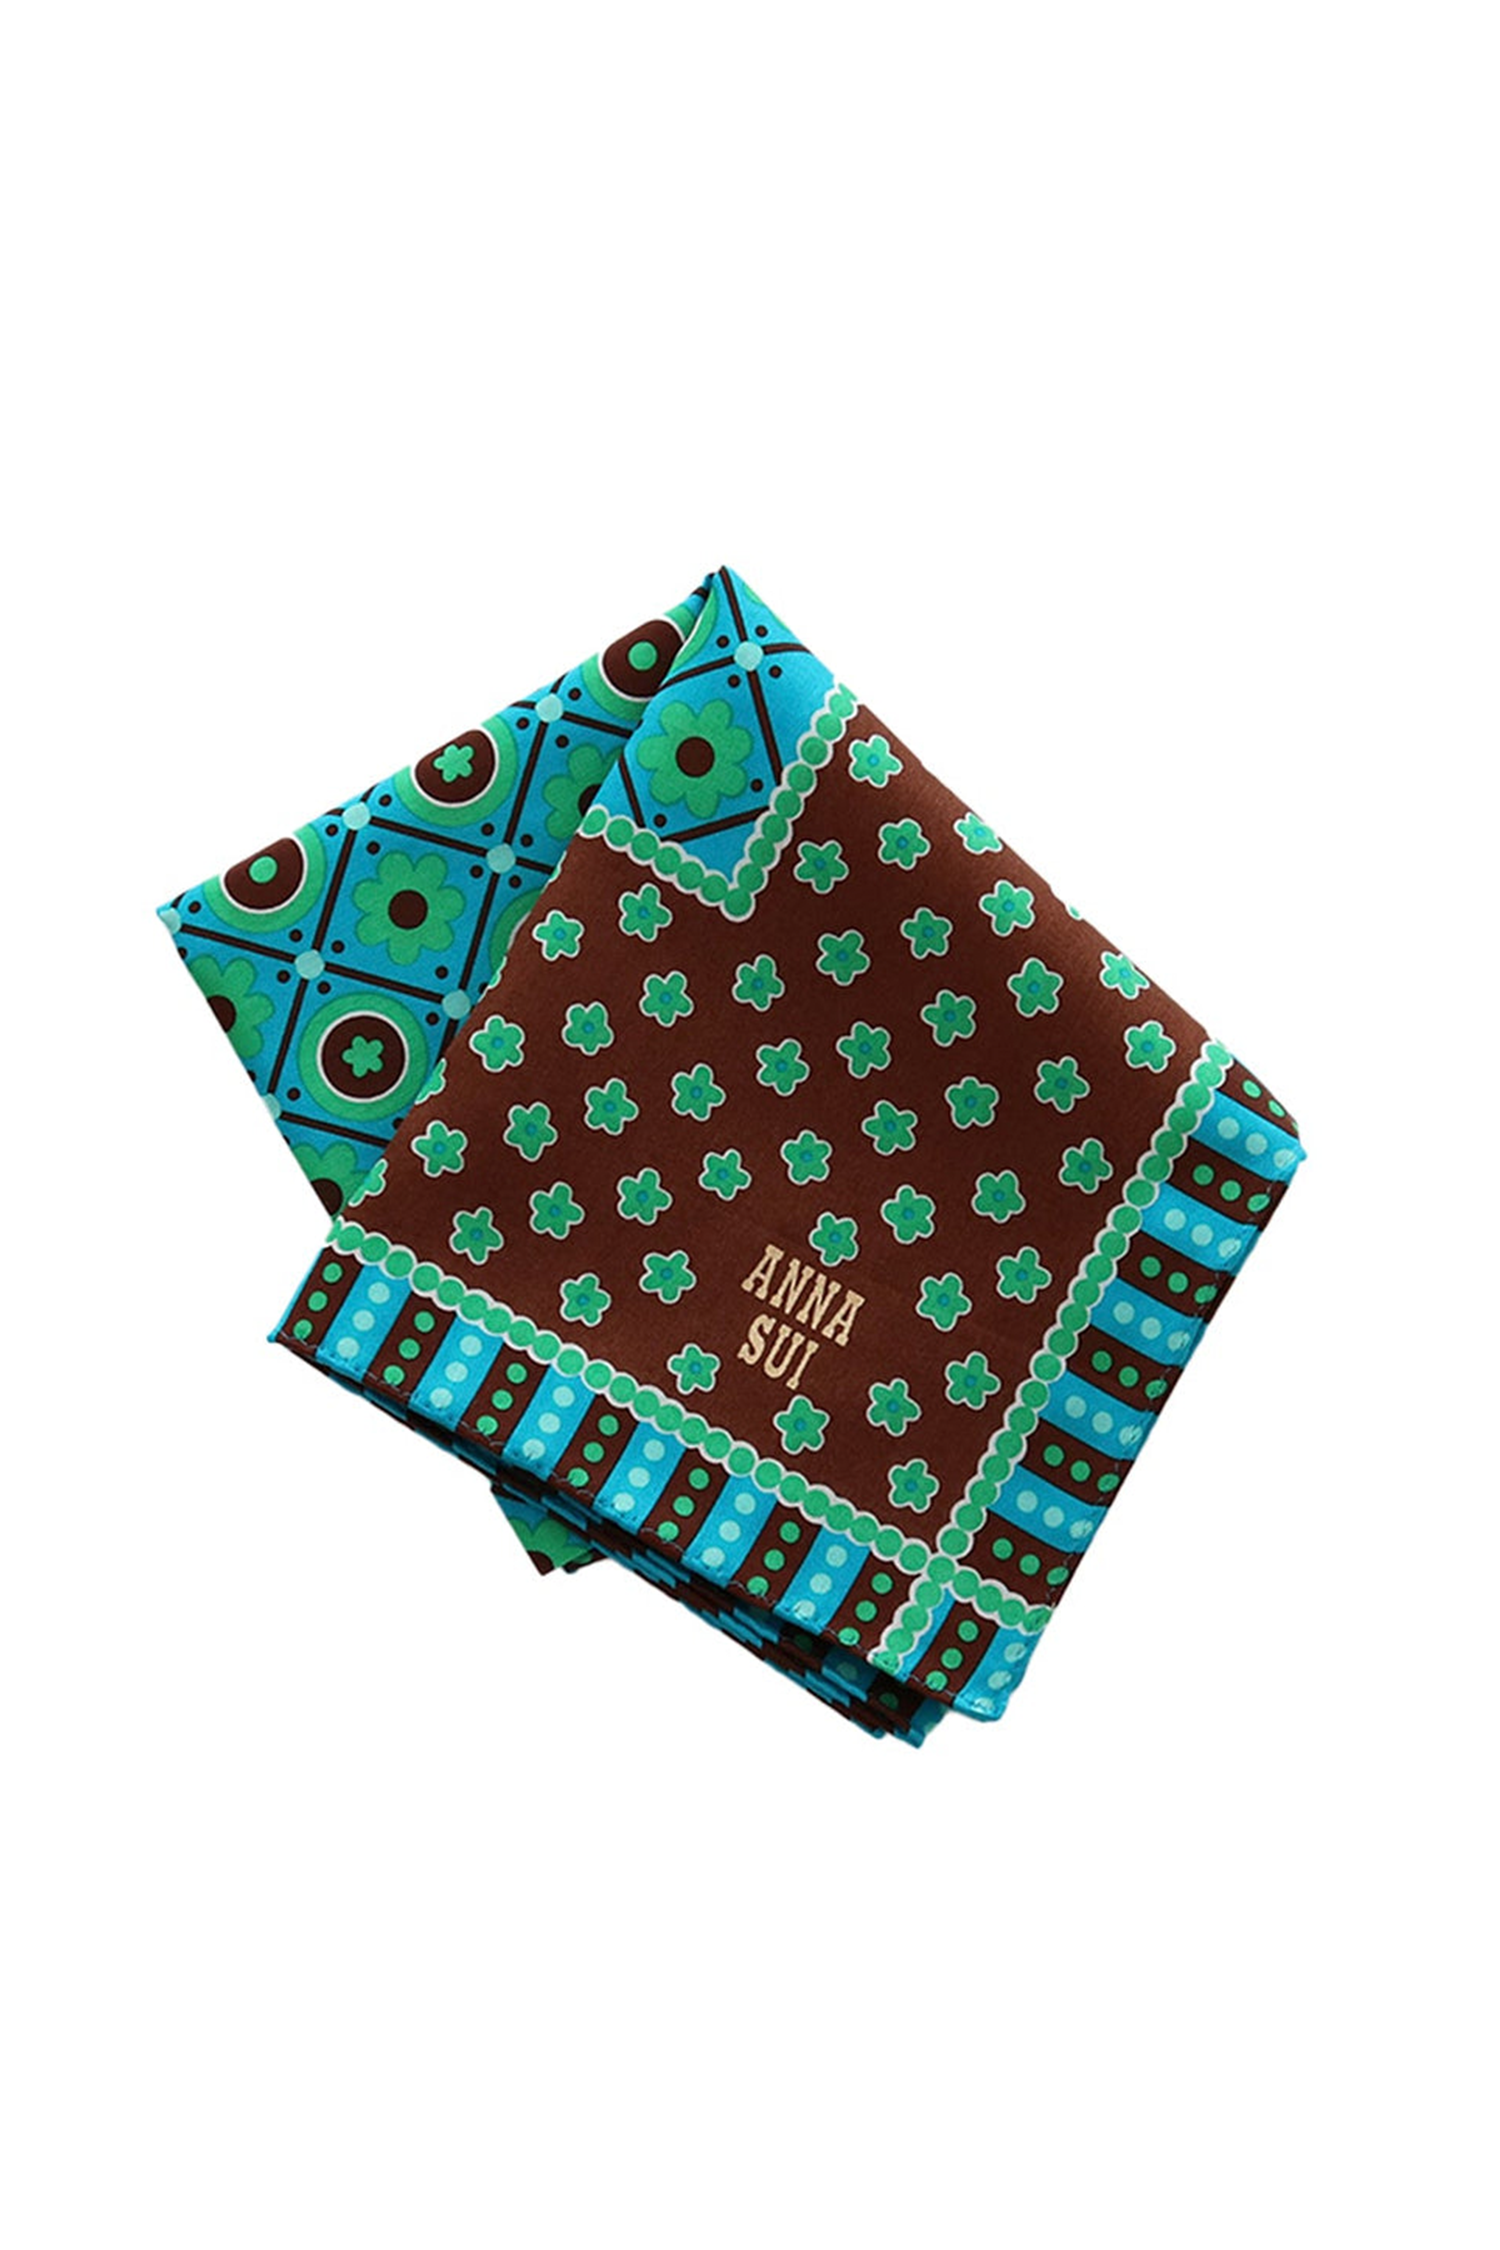 Handkerchief, blue square with green flower then brown with lines of green flowers, Anna’s label